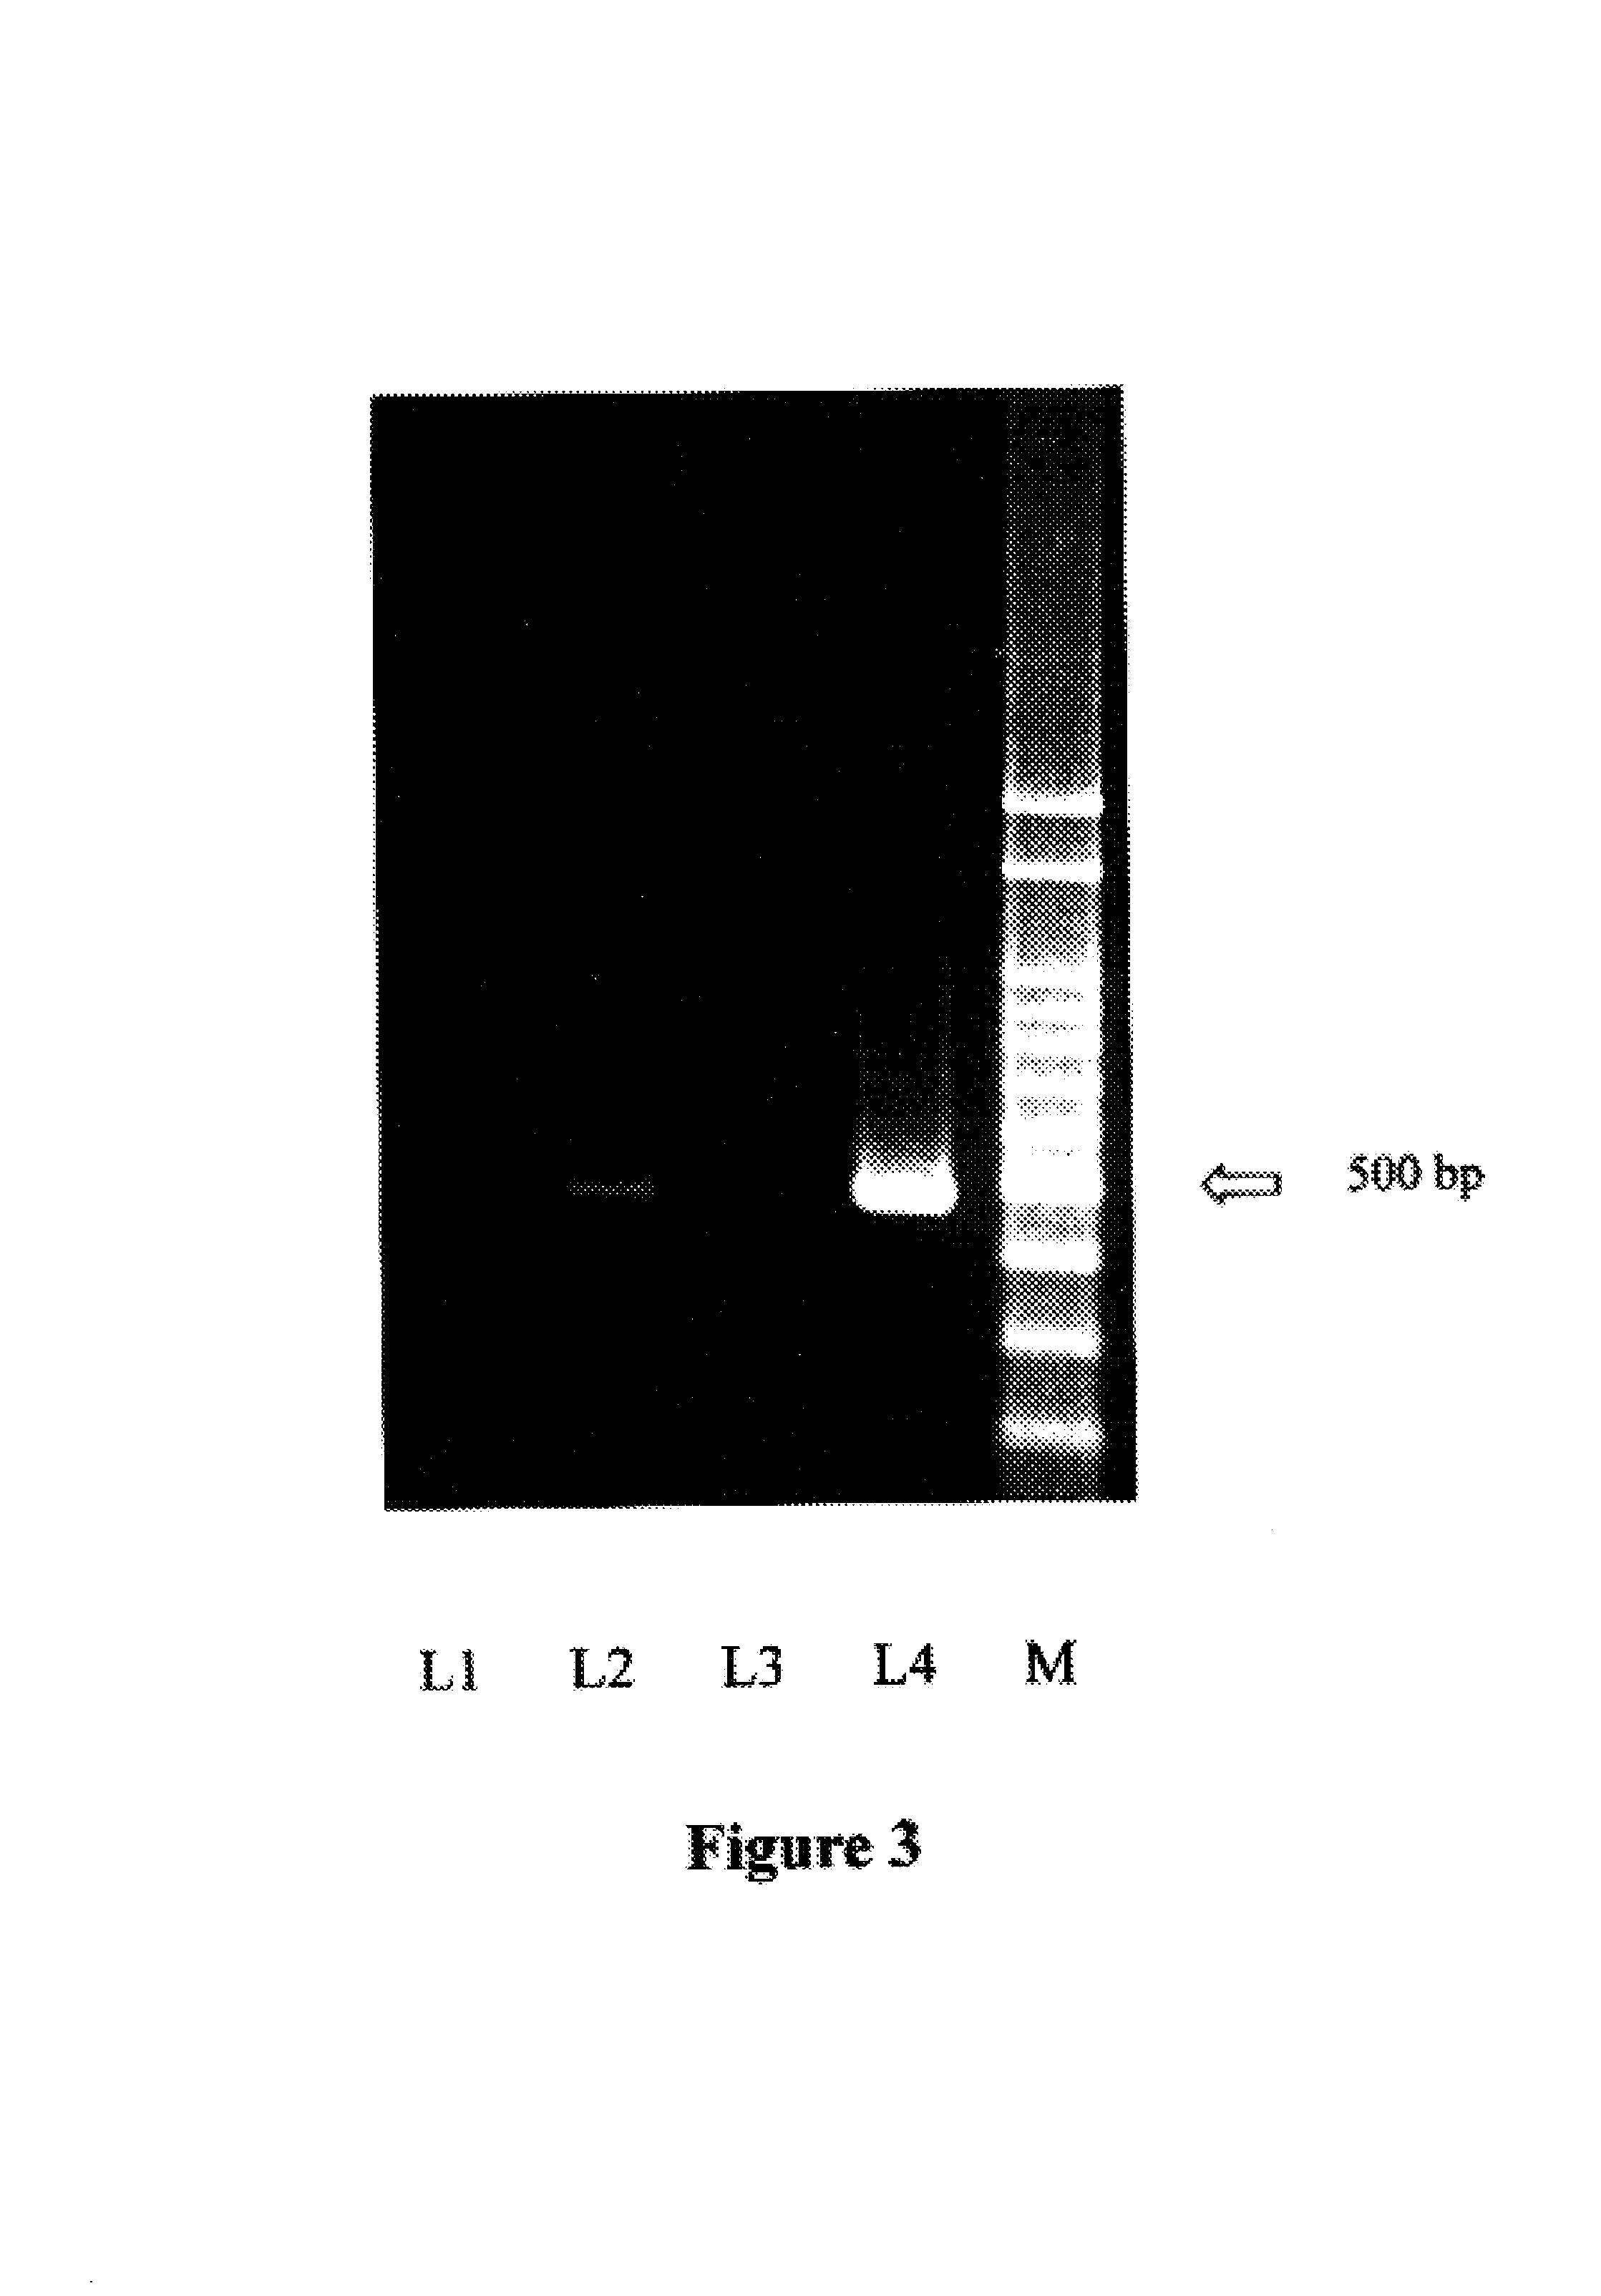 Method of marking solid or liquid substances with nucleic acid for anti-counterfeiting and authentication